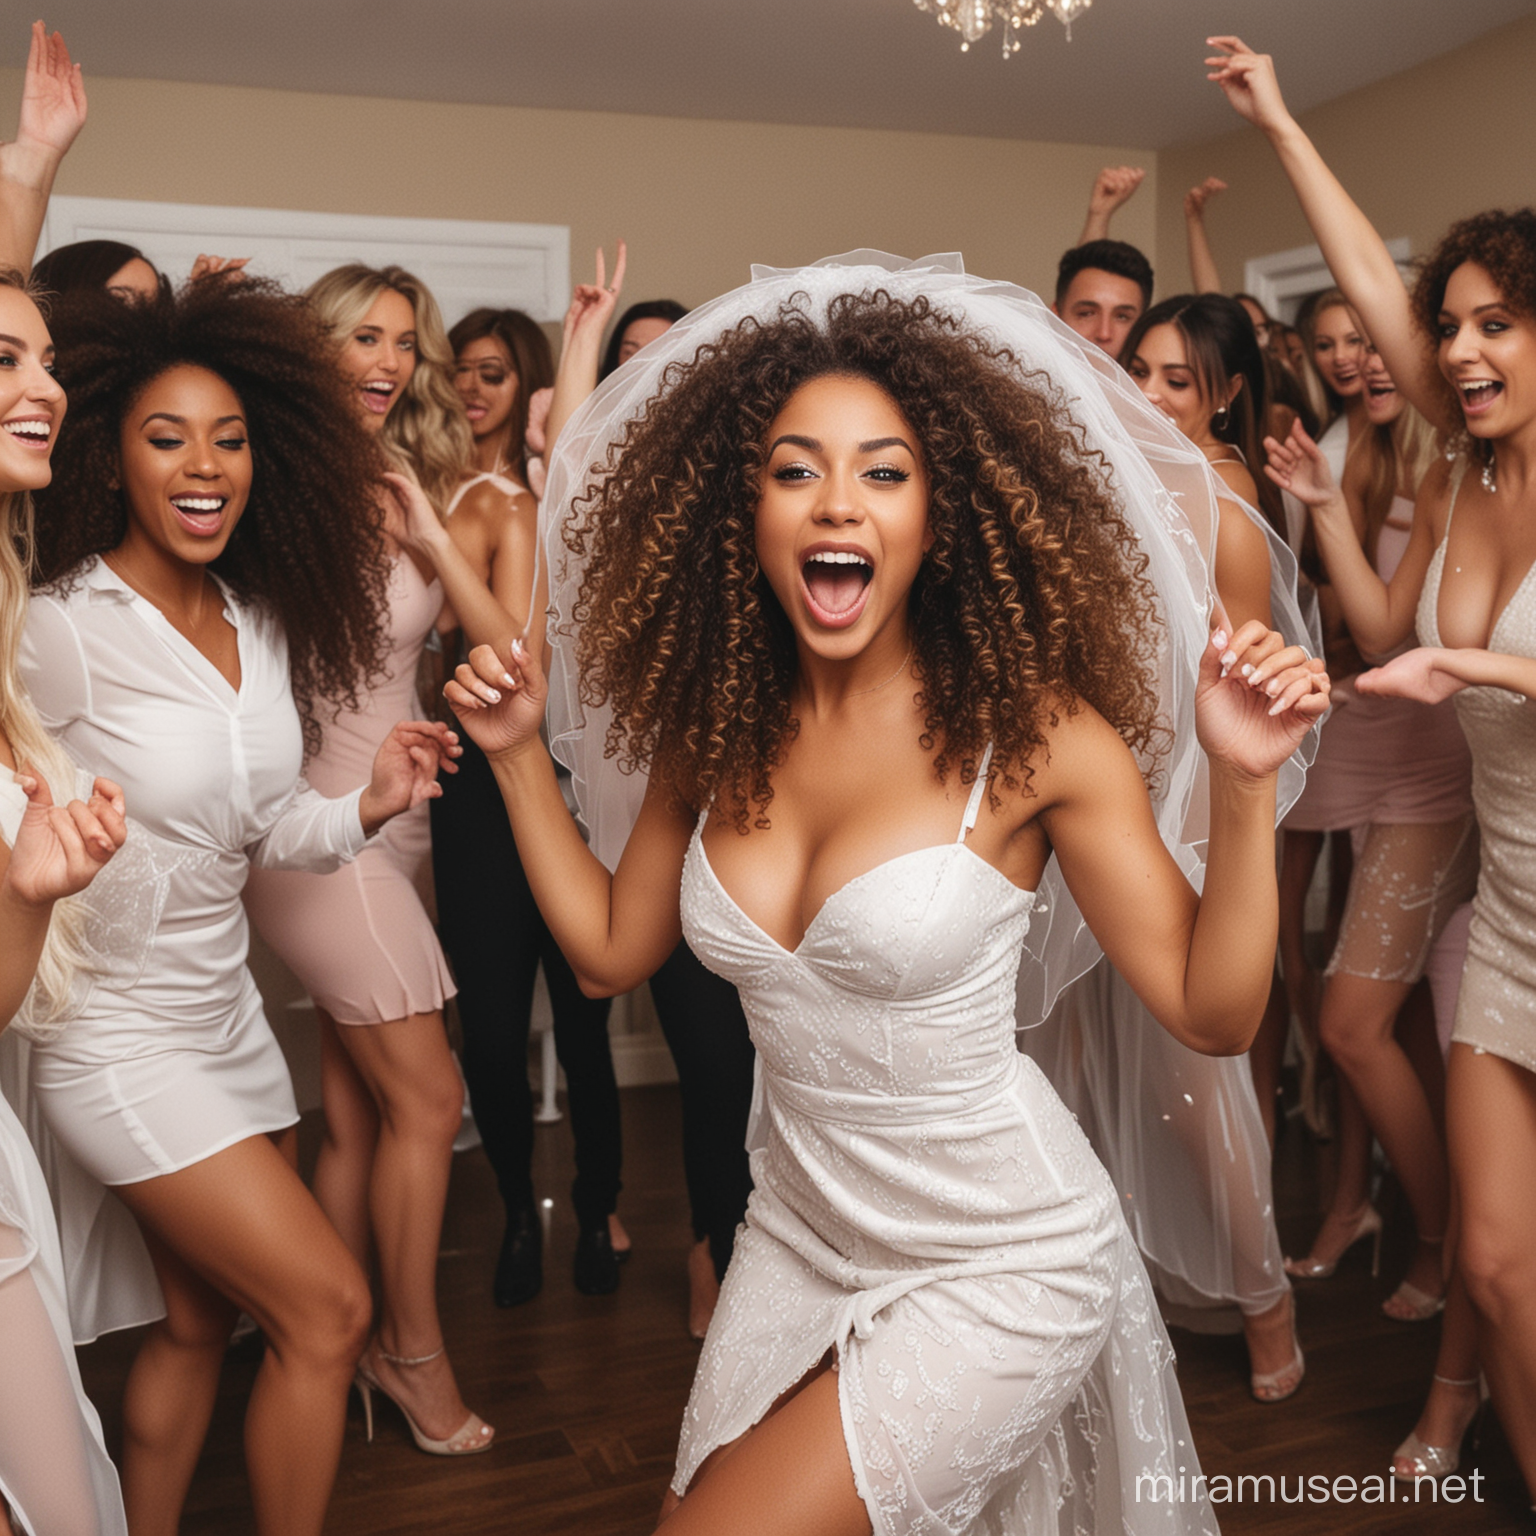 beautiful racially ambiguous woman twerking at her bachelorette party. She has big curly hair. Her friends are all cheering her on. She has on a veil and a sexy white dress

